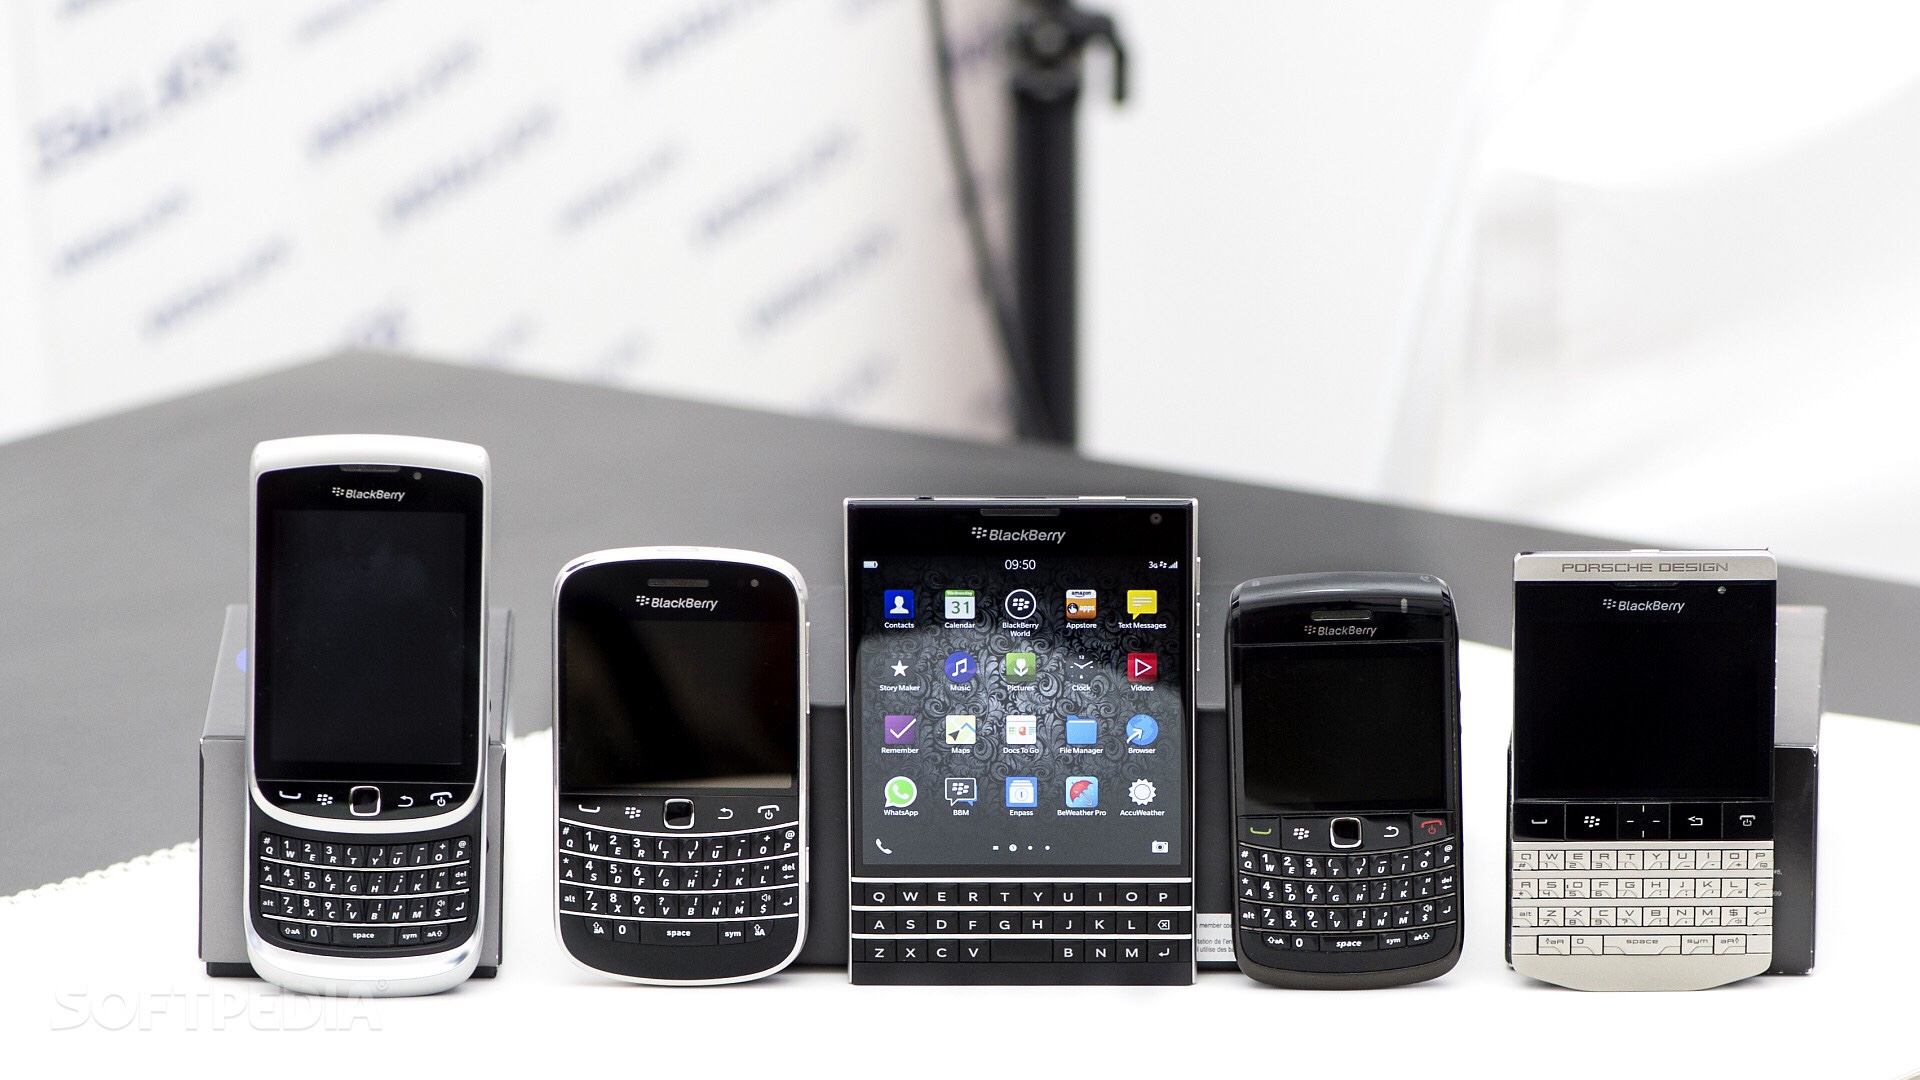 Microsoft and BlackBerry are teaming up to make work phones more secure